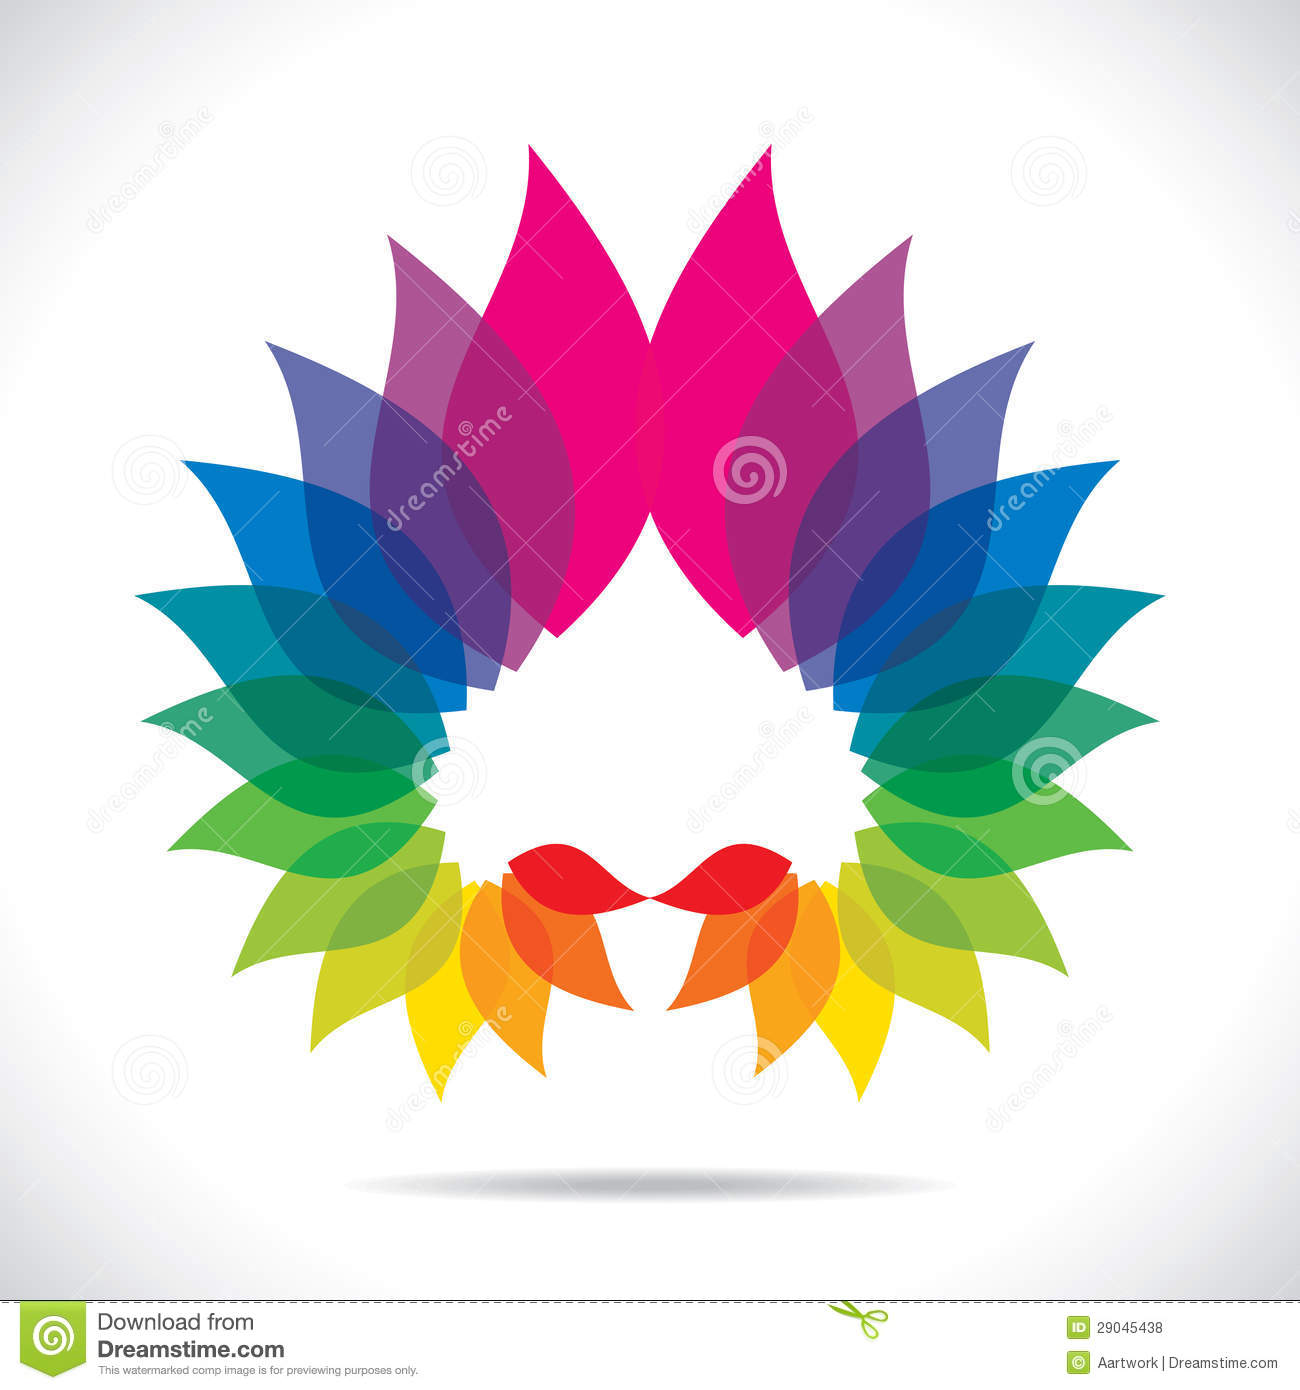 Colorful Lead Design Icon Royalty Free Stock Photos   Image  29045438